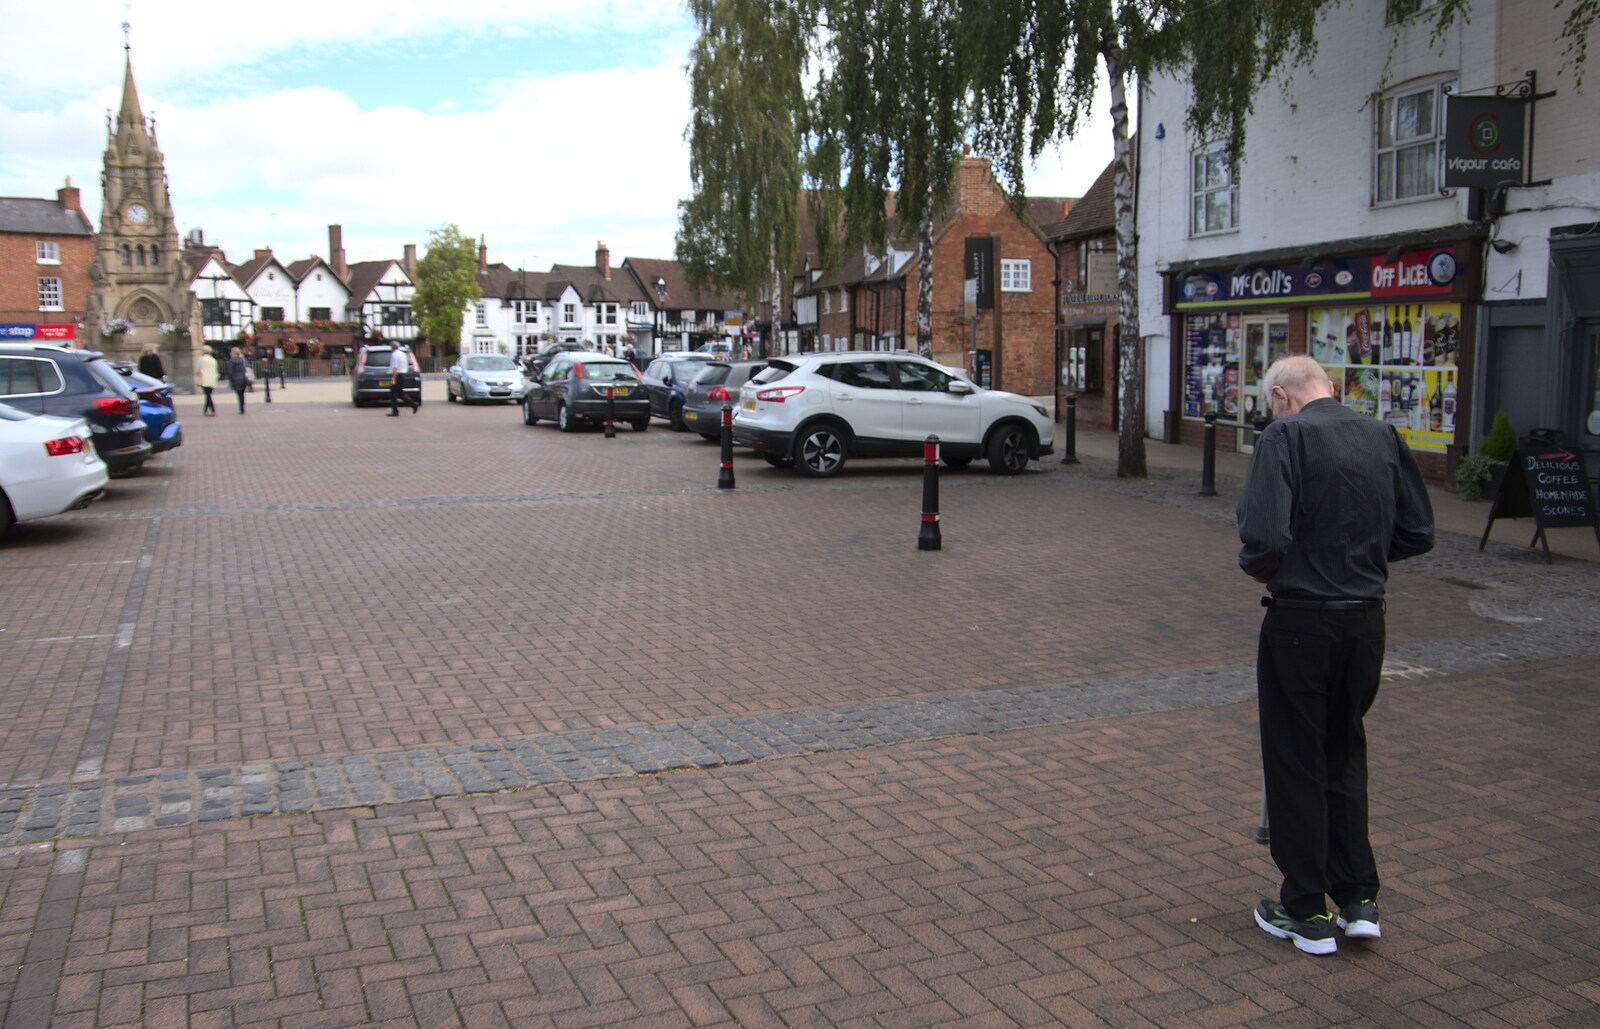 Grandad pauses to get a fag on from A Postcard from Stratford-upon-Avon, Warwickshire - 9th September 2018